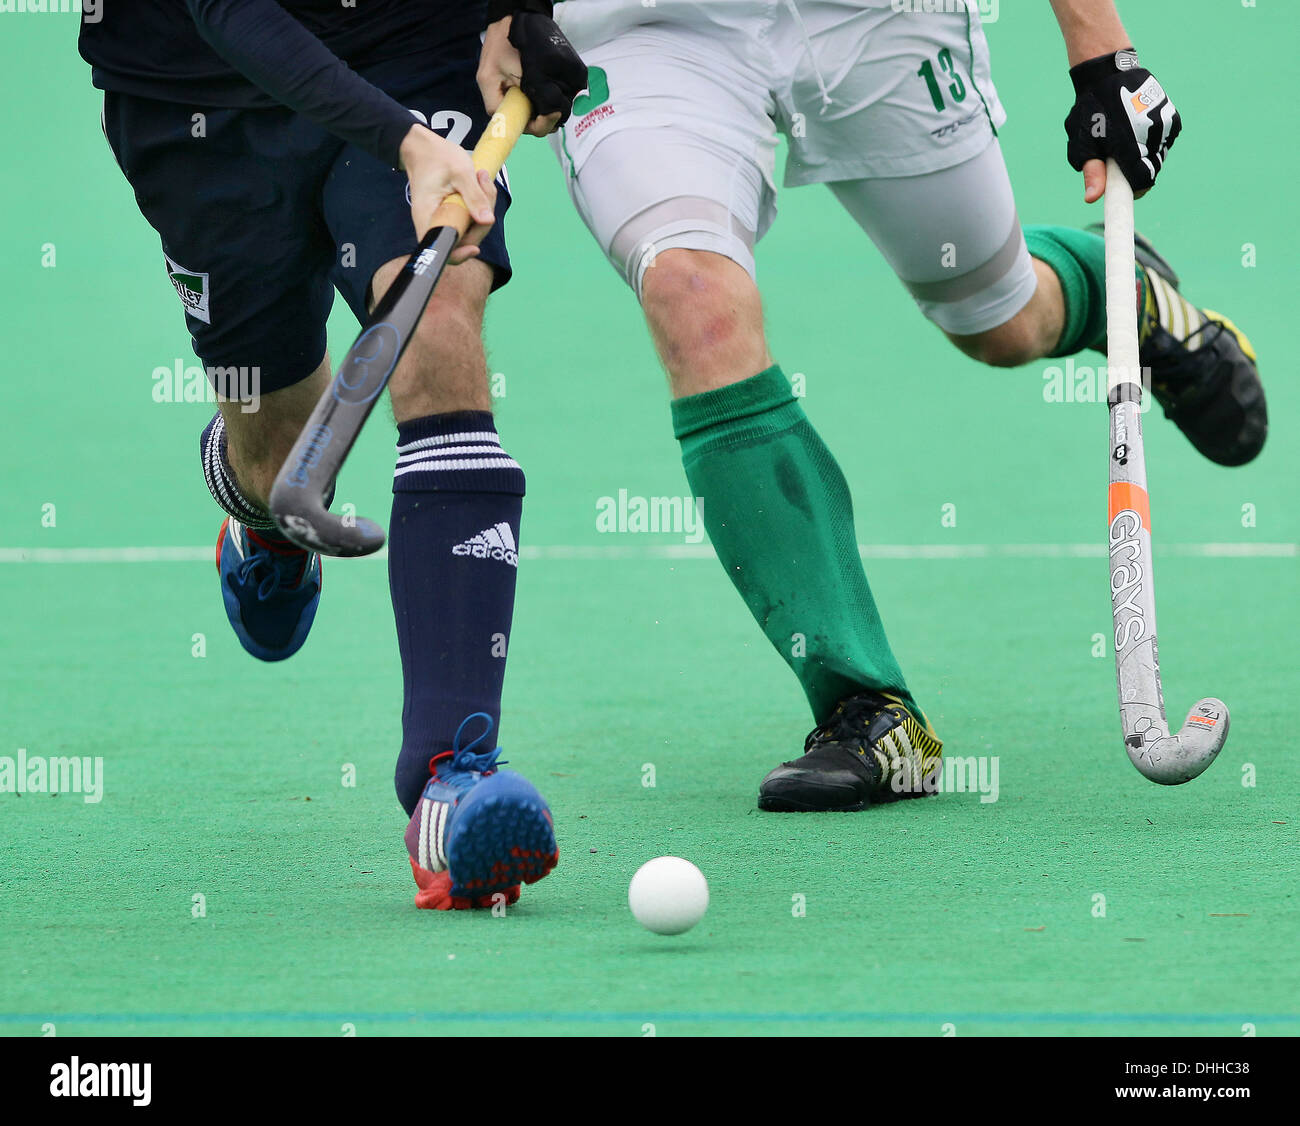 Waist down shot of two field hockey players with hockey sticks running towards the camera while competing for the ball. Stock Photo